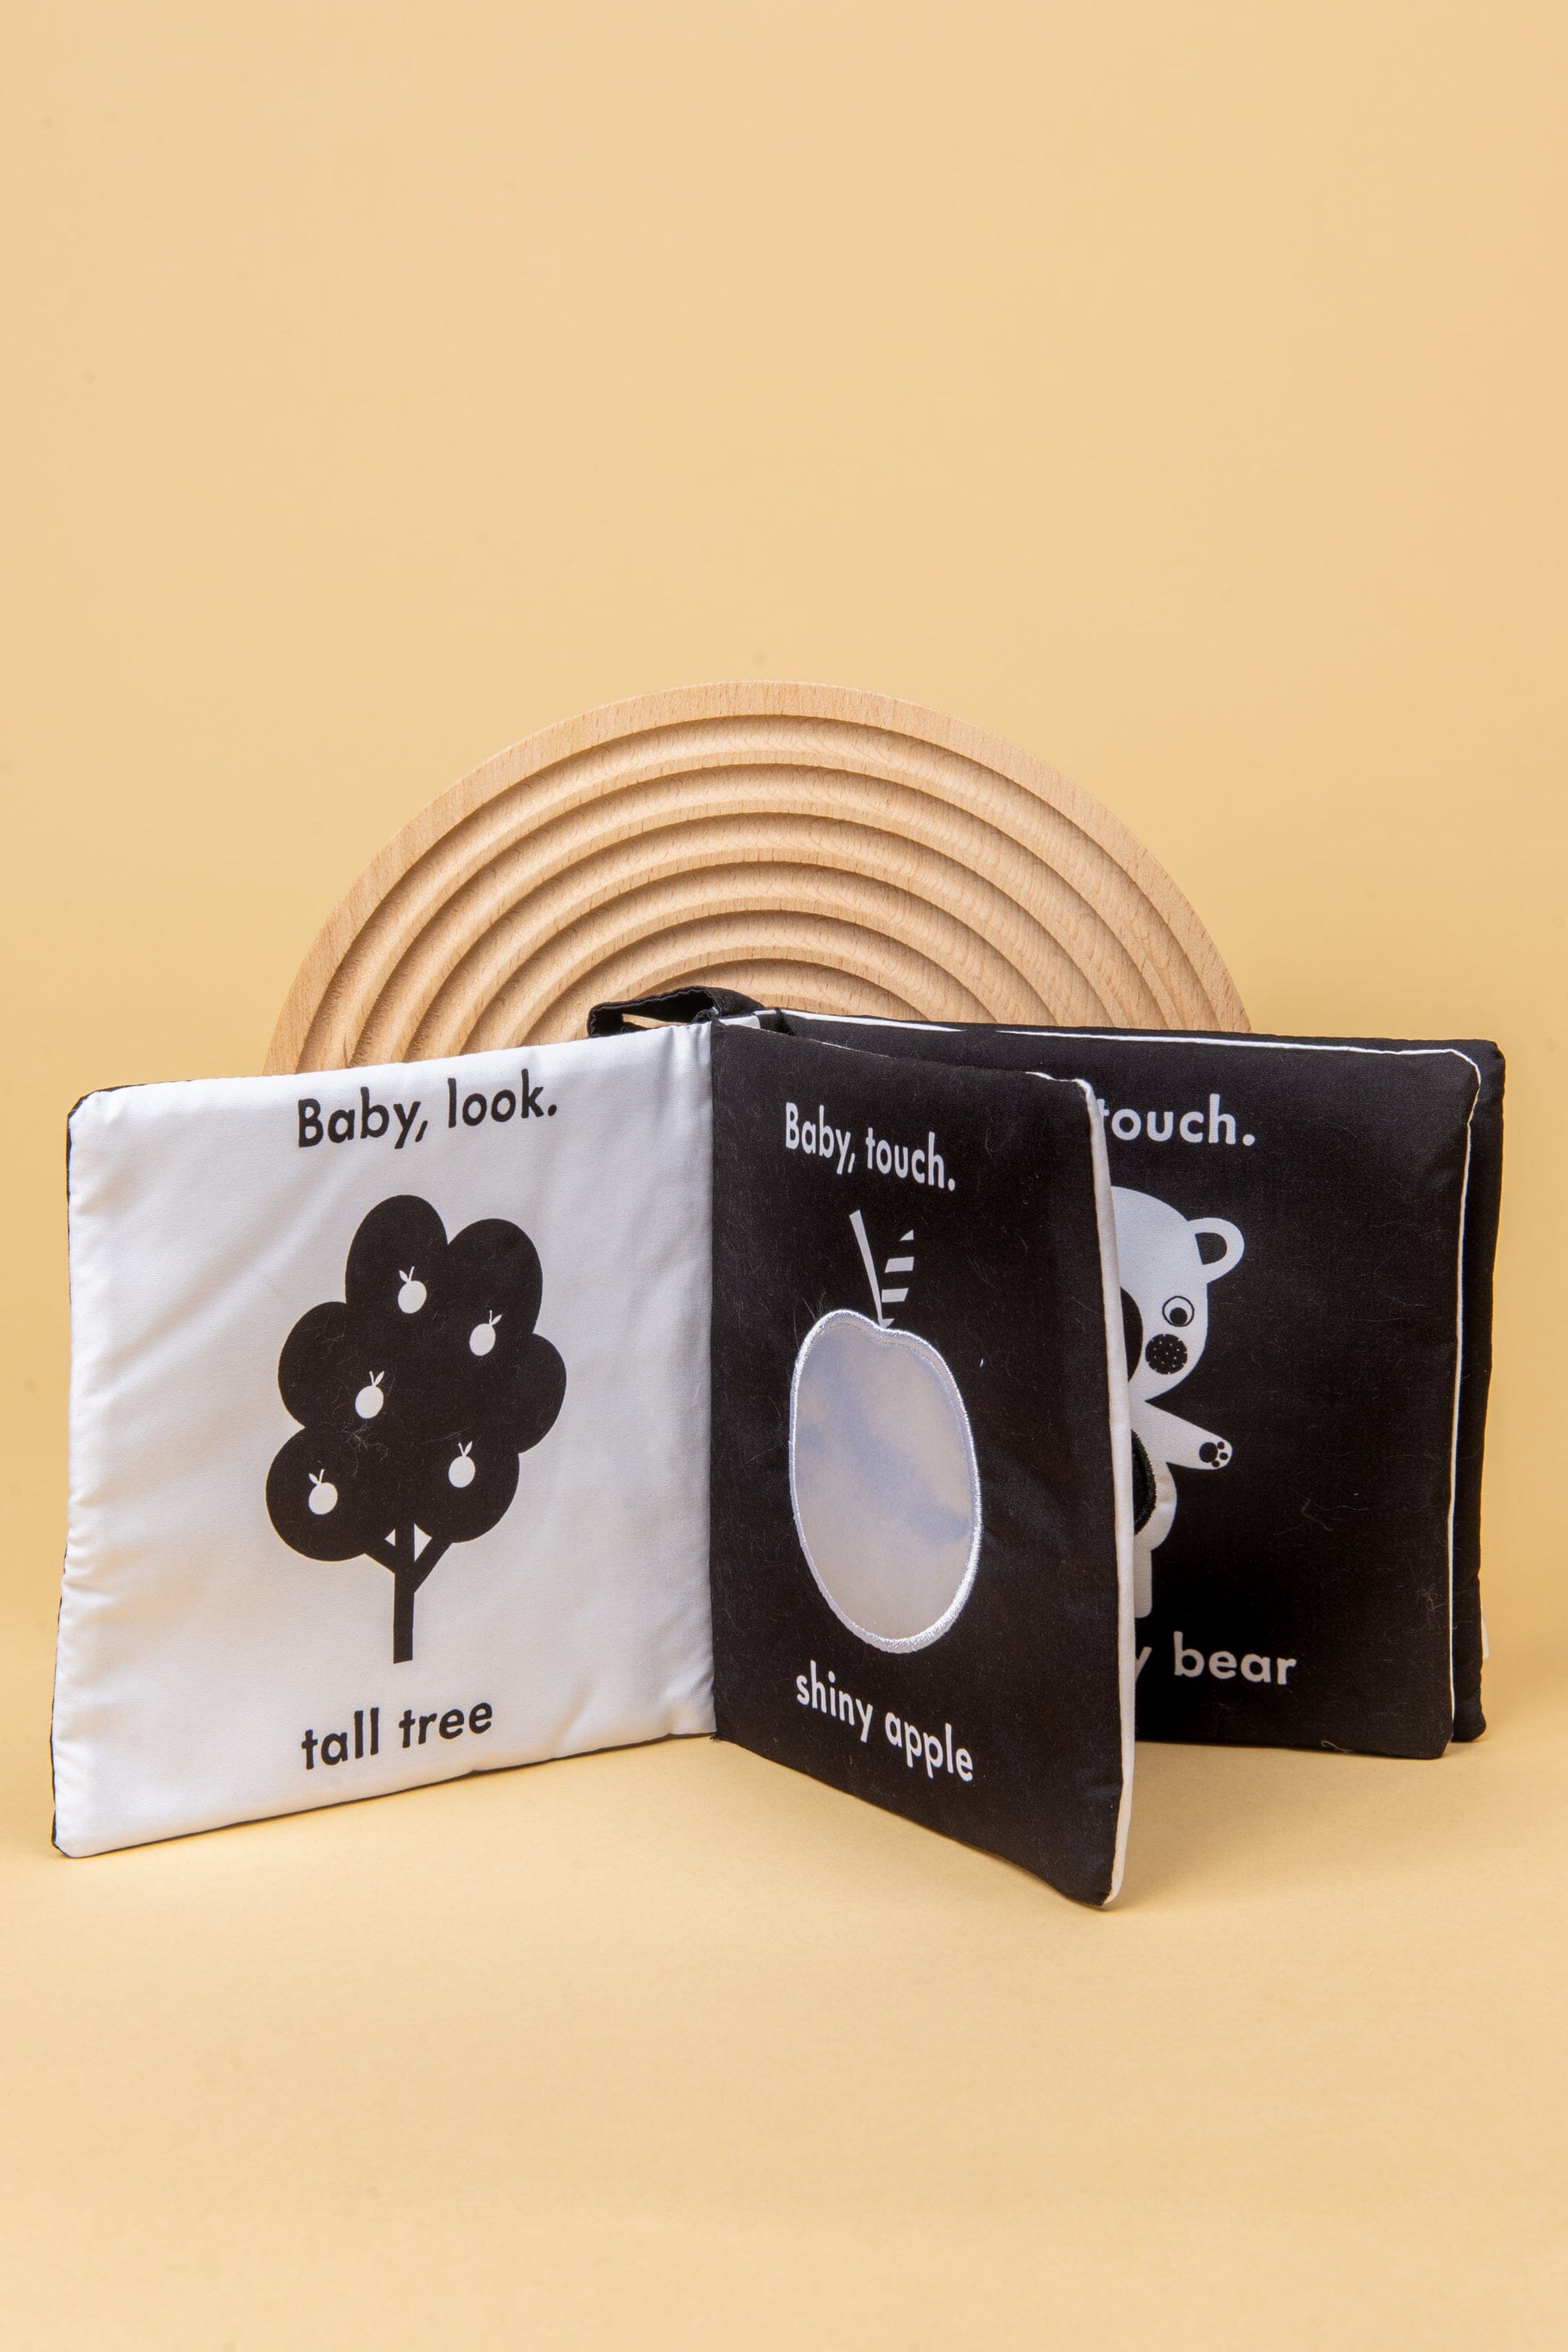 My First Book: A Black & White Cloth Book book Baby Touch 